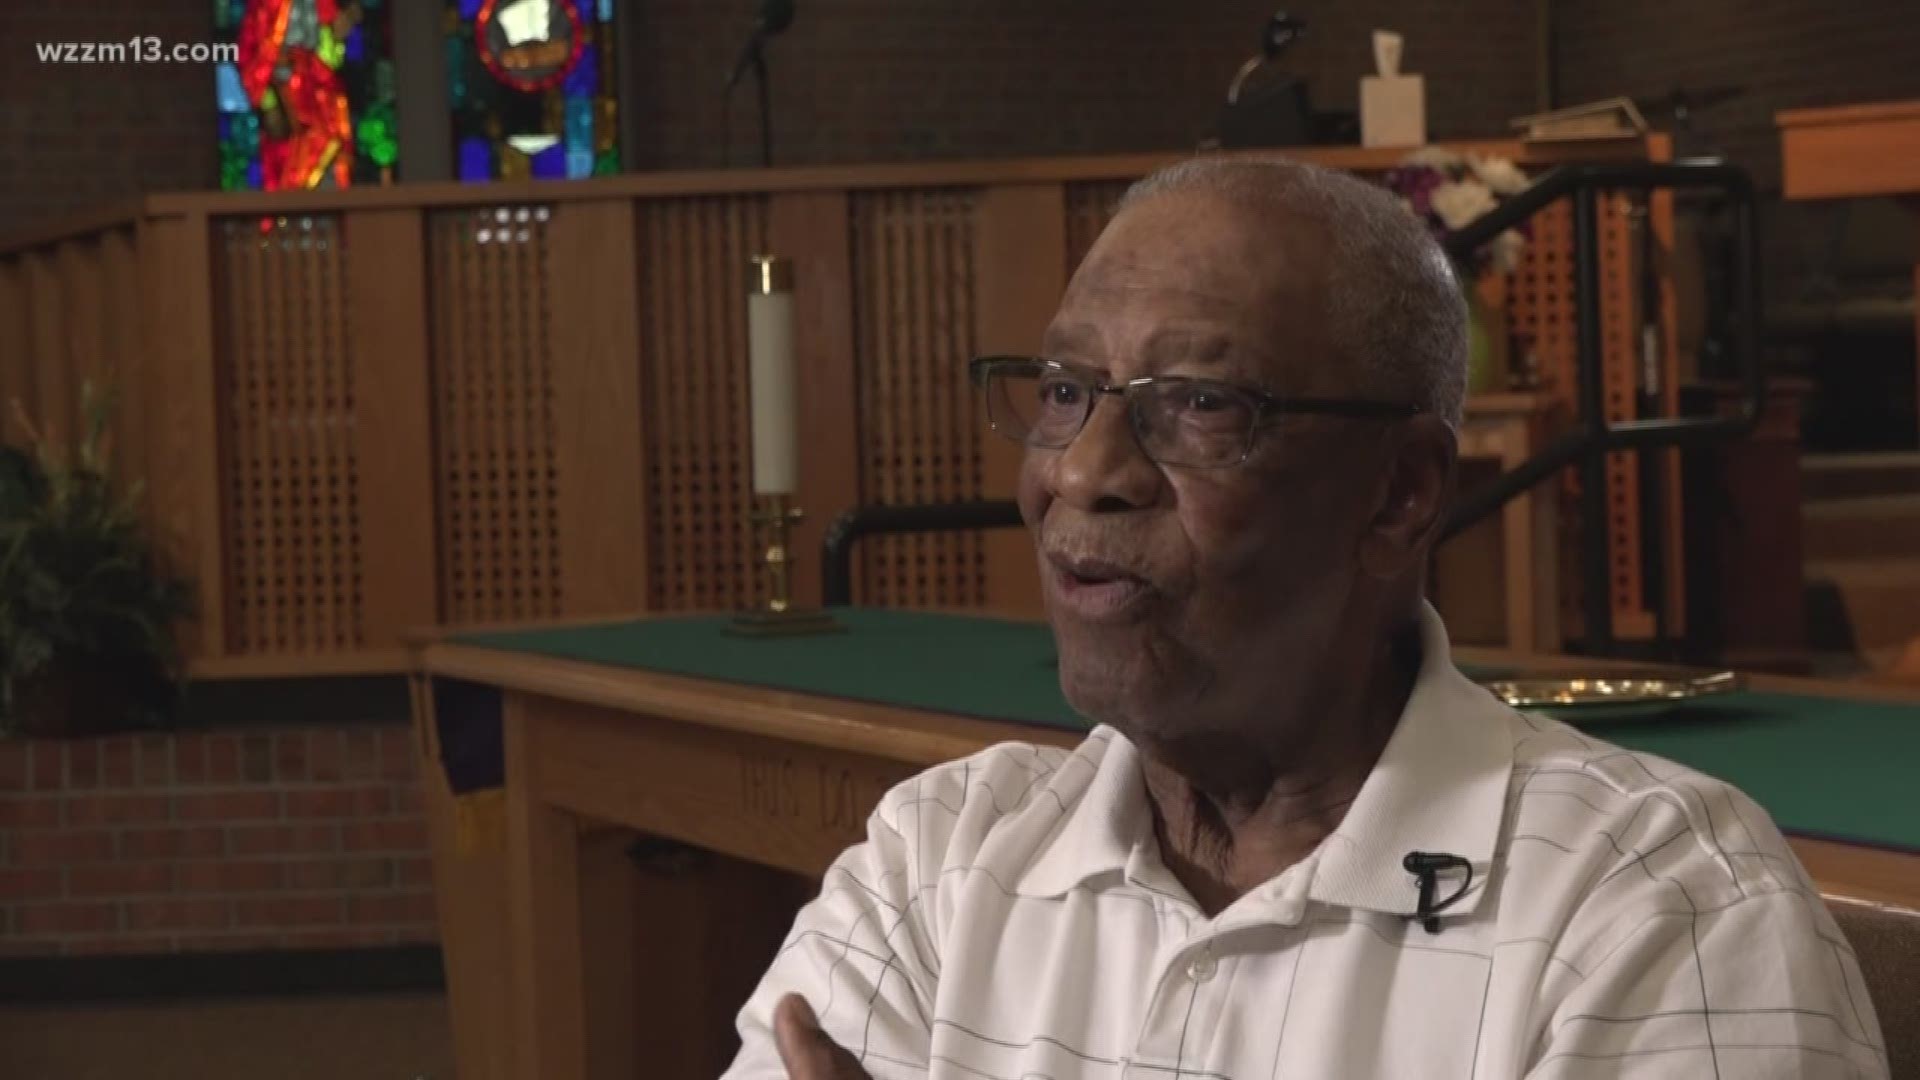 West Mich. pastor shares memories of Aretha Franklin